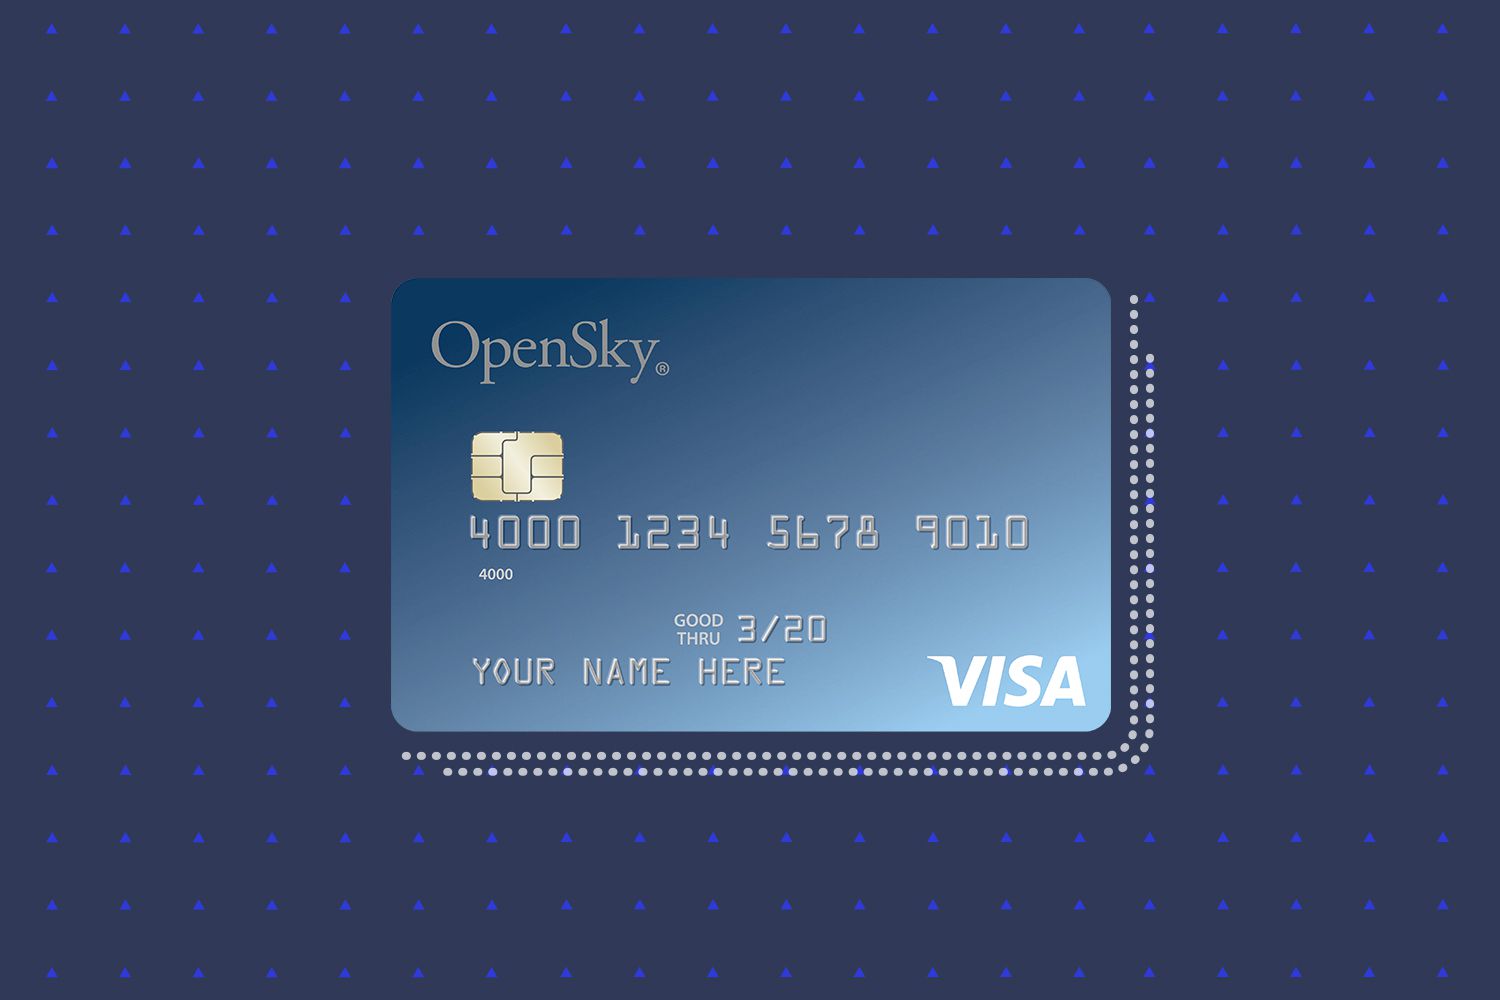 What Is The Minimum Payment Percentage For OpenSky Credit Card